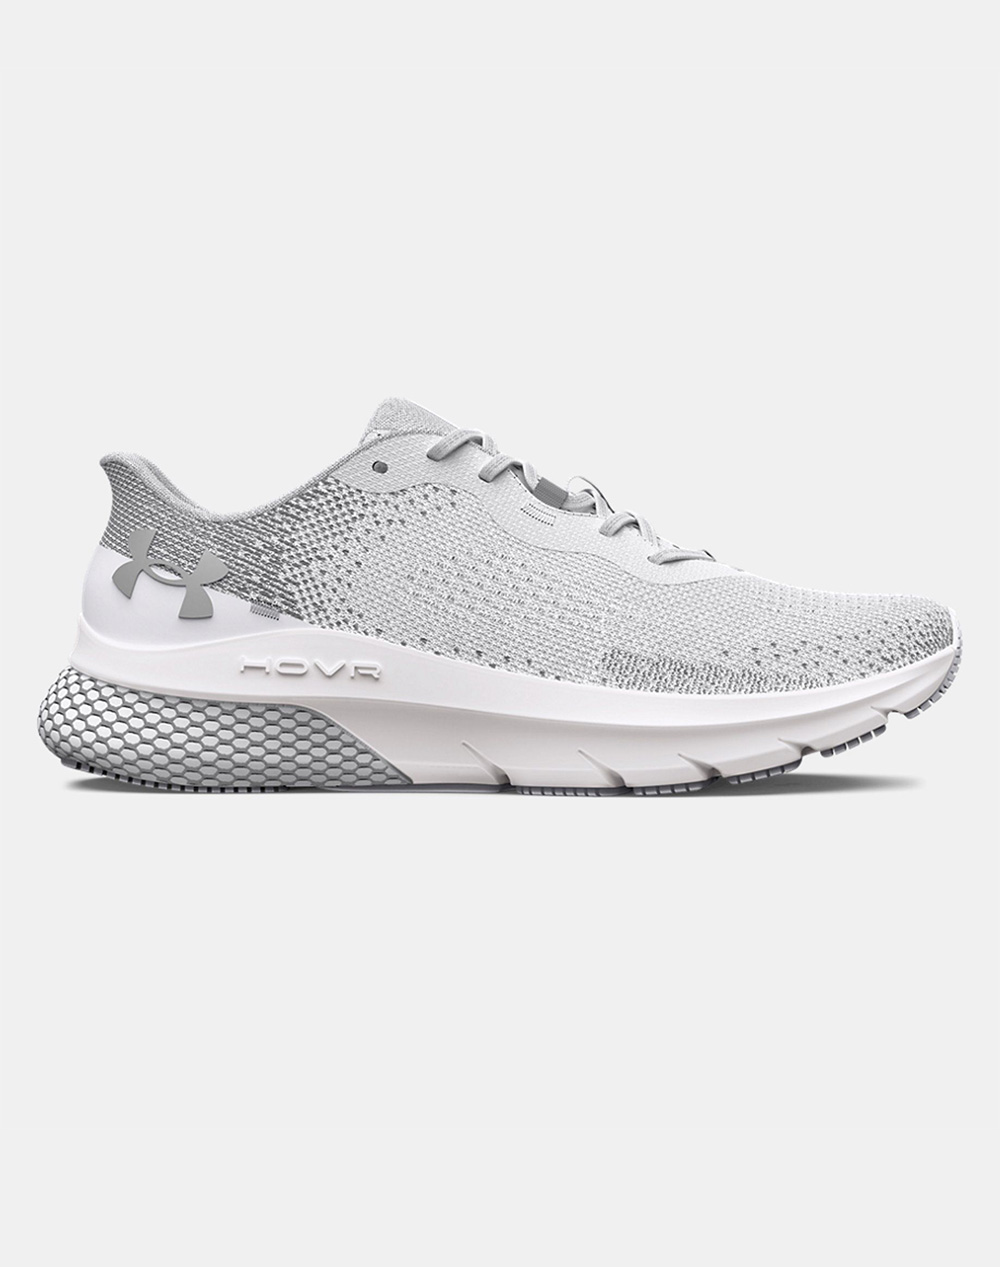 UNDER ARMOUR Women”s UA HOVR™ Turbulence 2 Running Shoes 3026525-9191 Gray 3710AUNDE6070007_XR20783